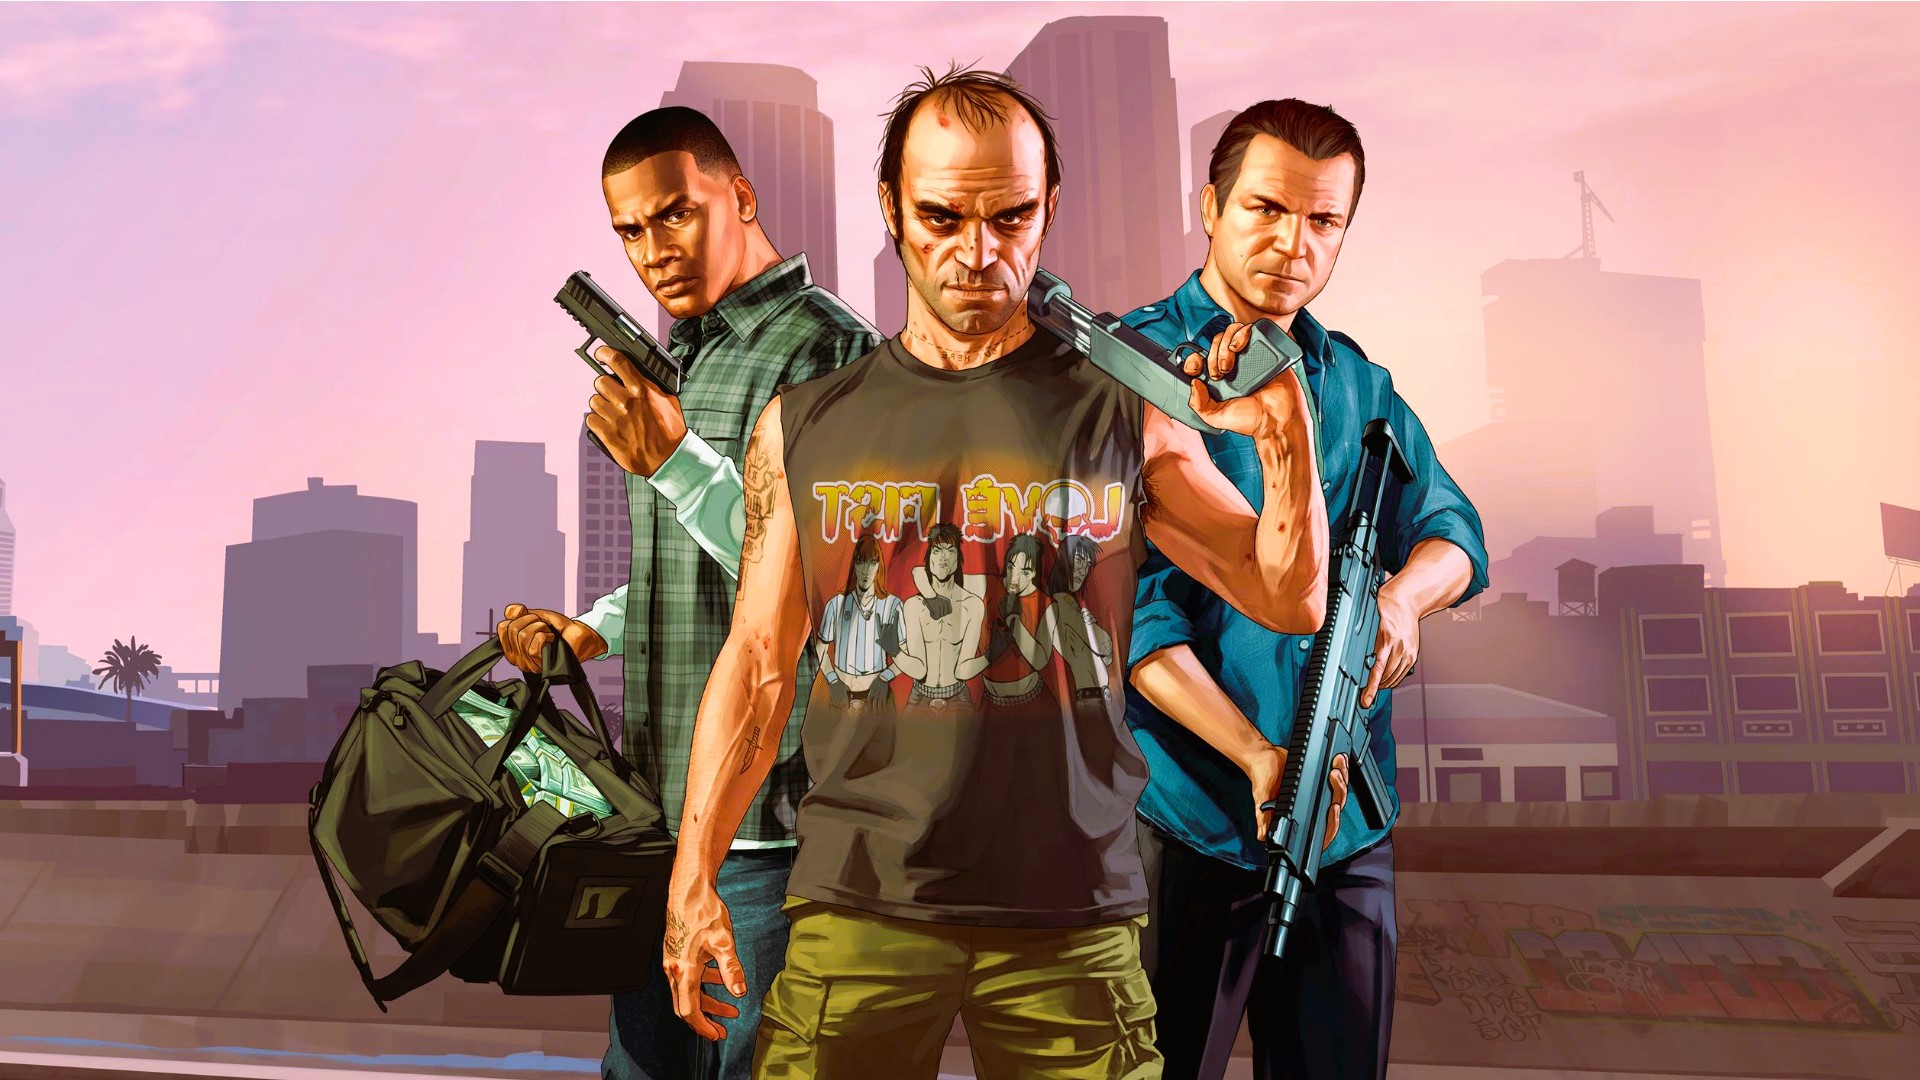 GTA V: Five Years Later, Still Going Strong in VR